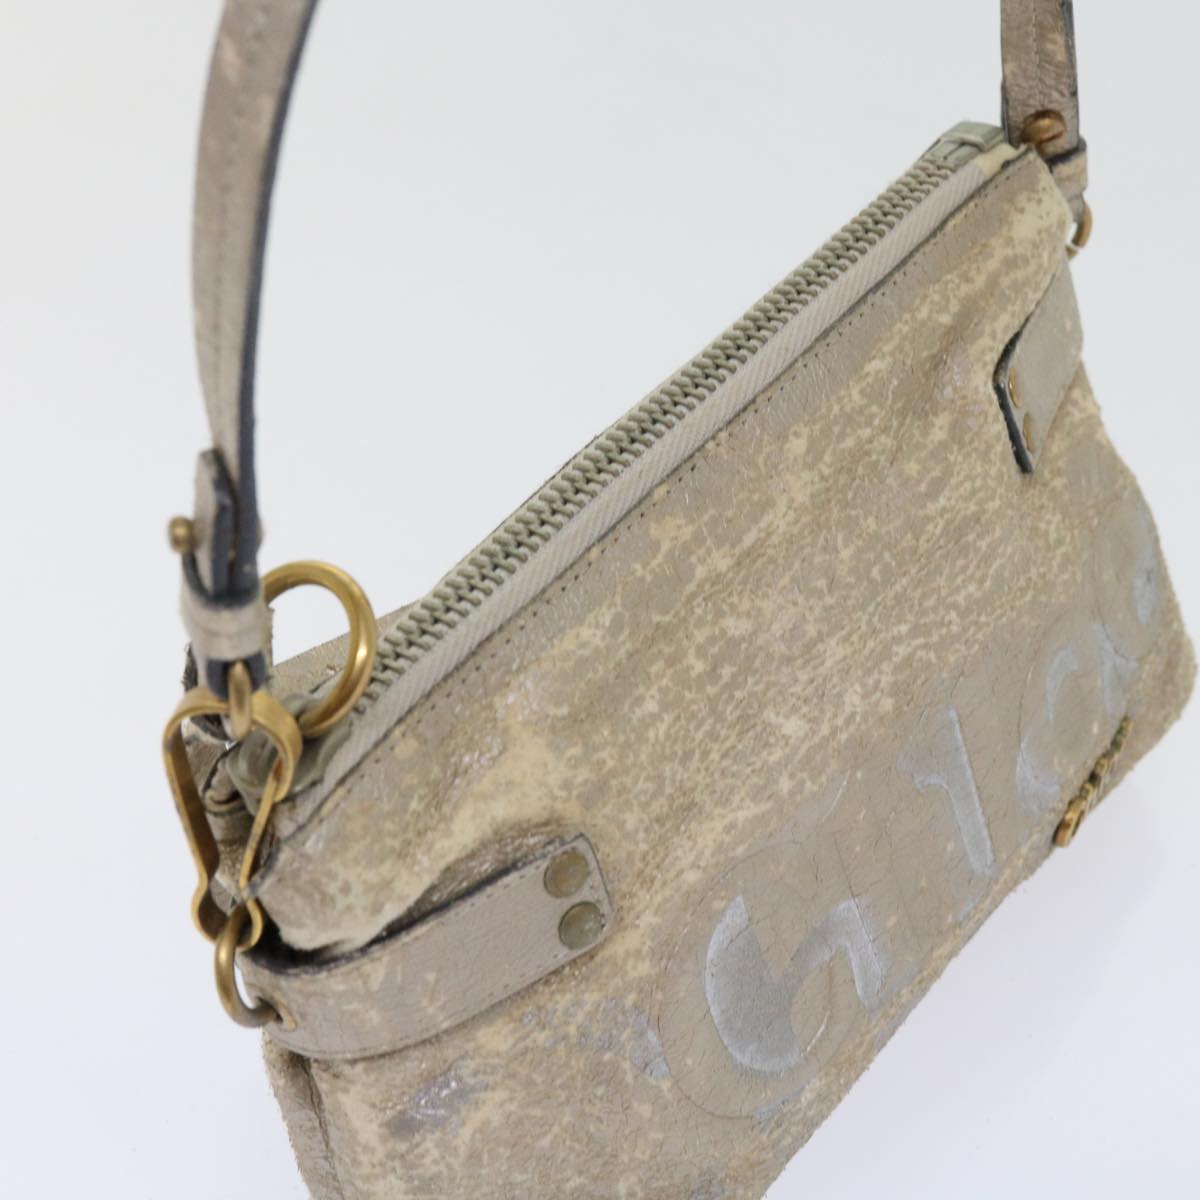 Chloe Shoulder Bag Leather Silver 02-09-51-595 Auth bs10805